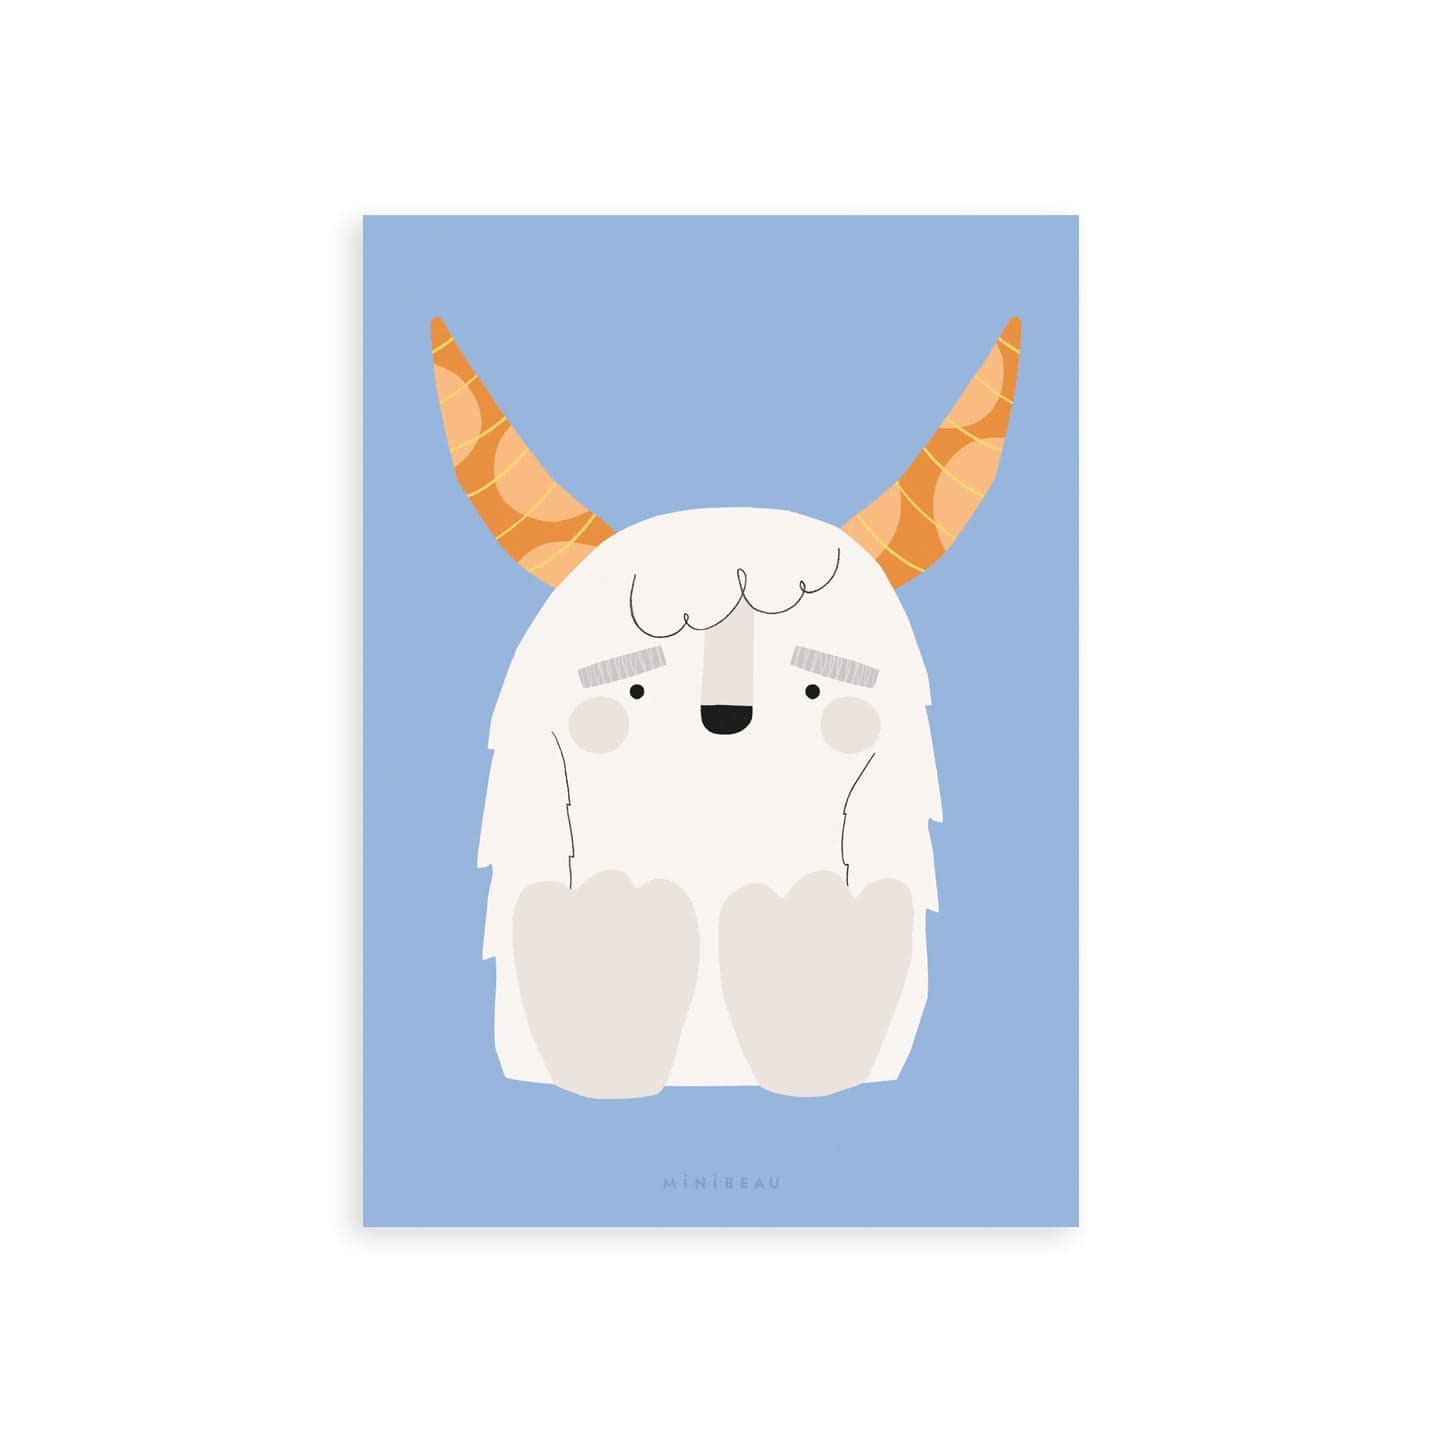 Our Happy Alphabet 'Y' Art Print shows a smiling white Yeti, with big brown horns, sitting to create a Y shape, on a light blue background.